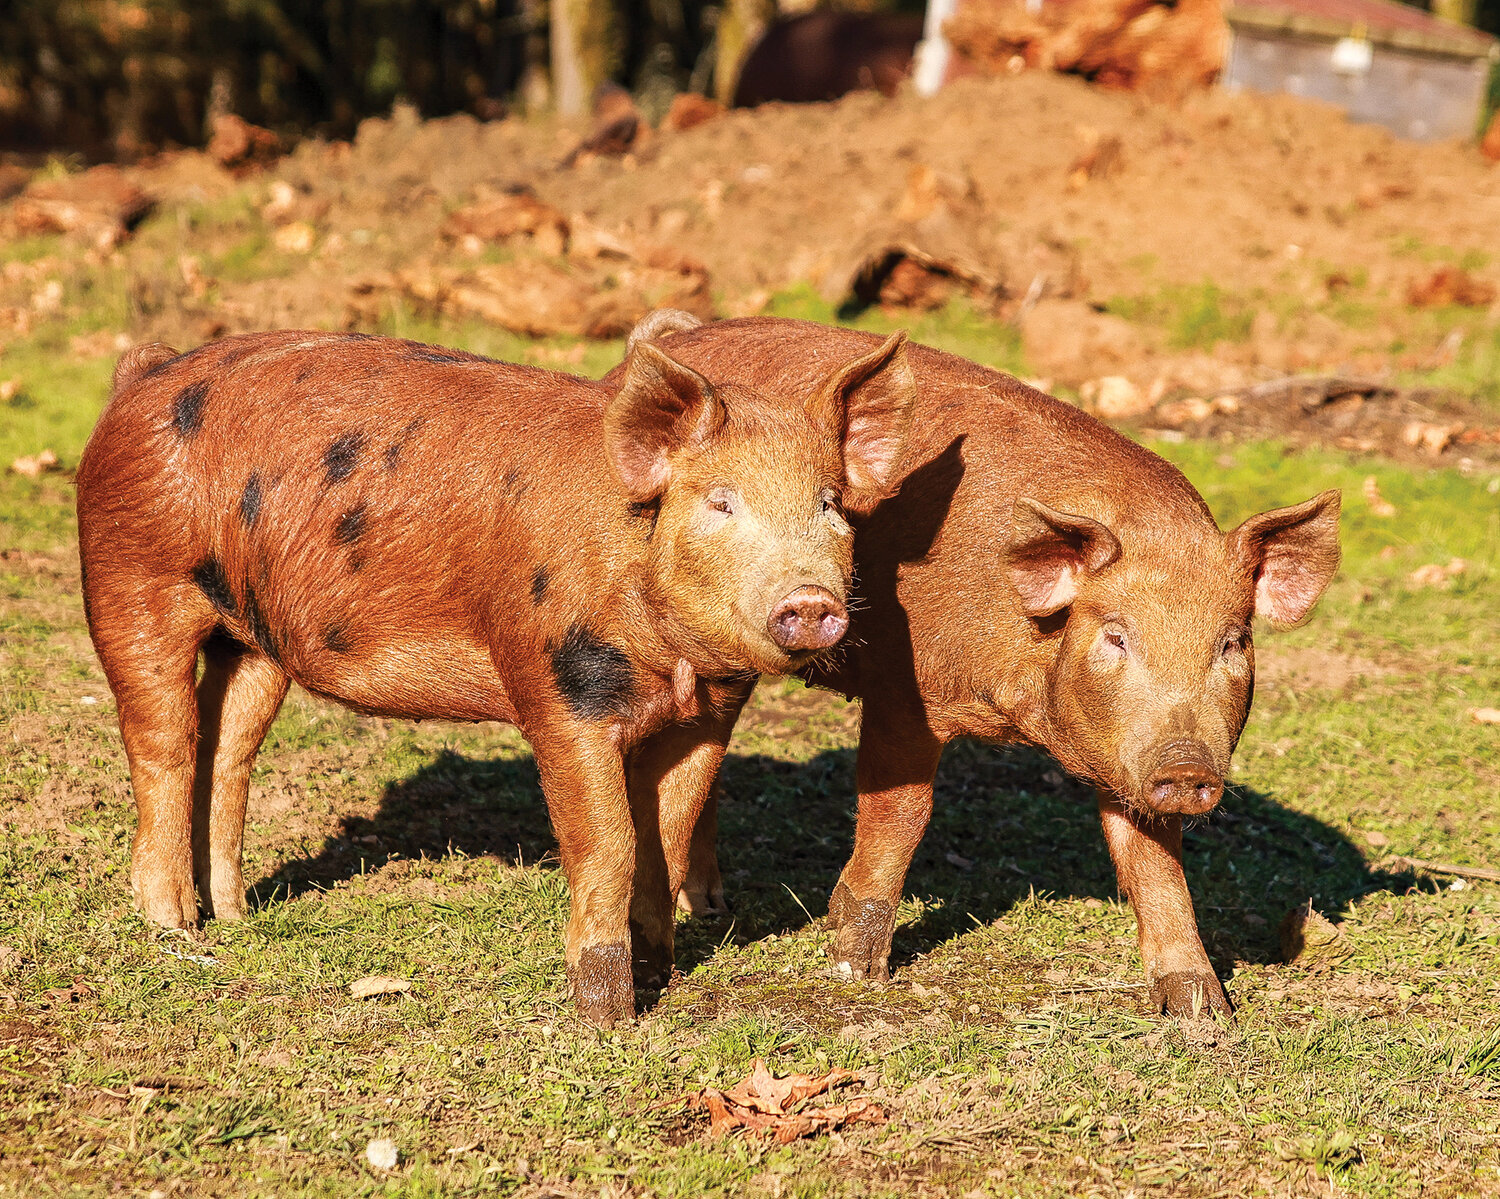 A couple of Mark Lopez’s Red Wattle pigs look curiously at the camera on Tuesday, Nov. 28 at Gather and Feast Farm in La Center.